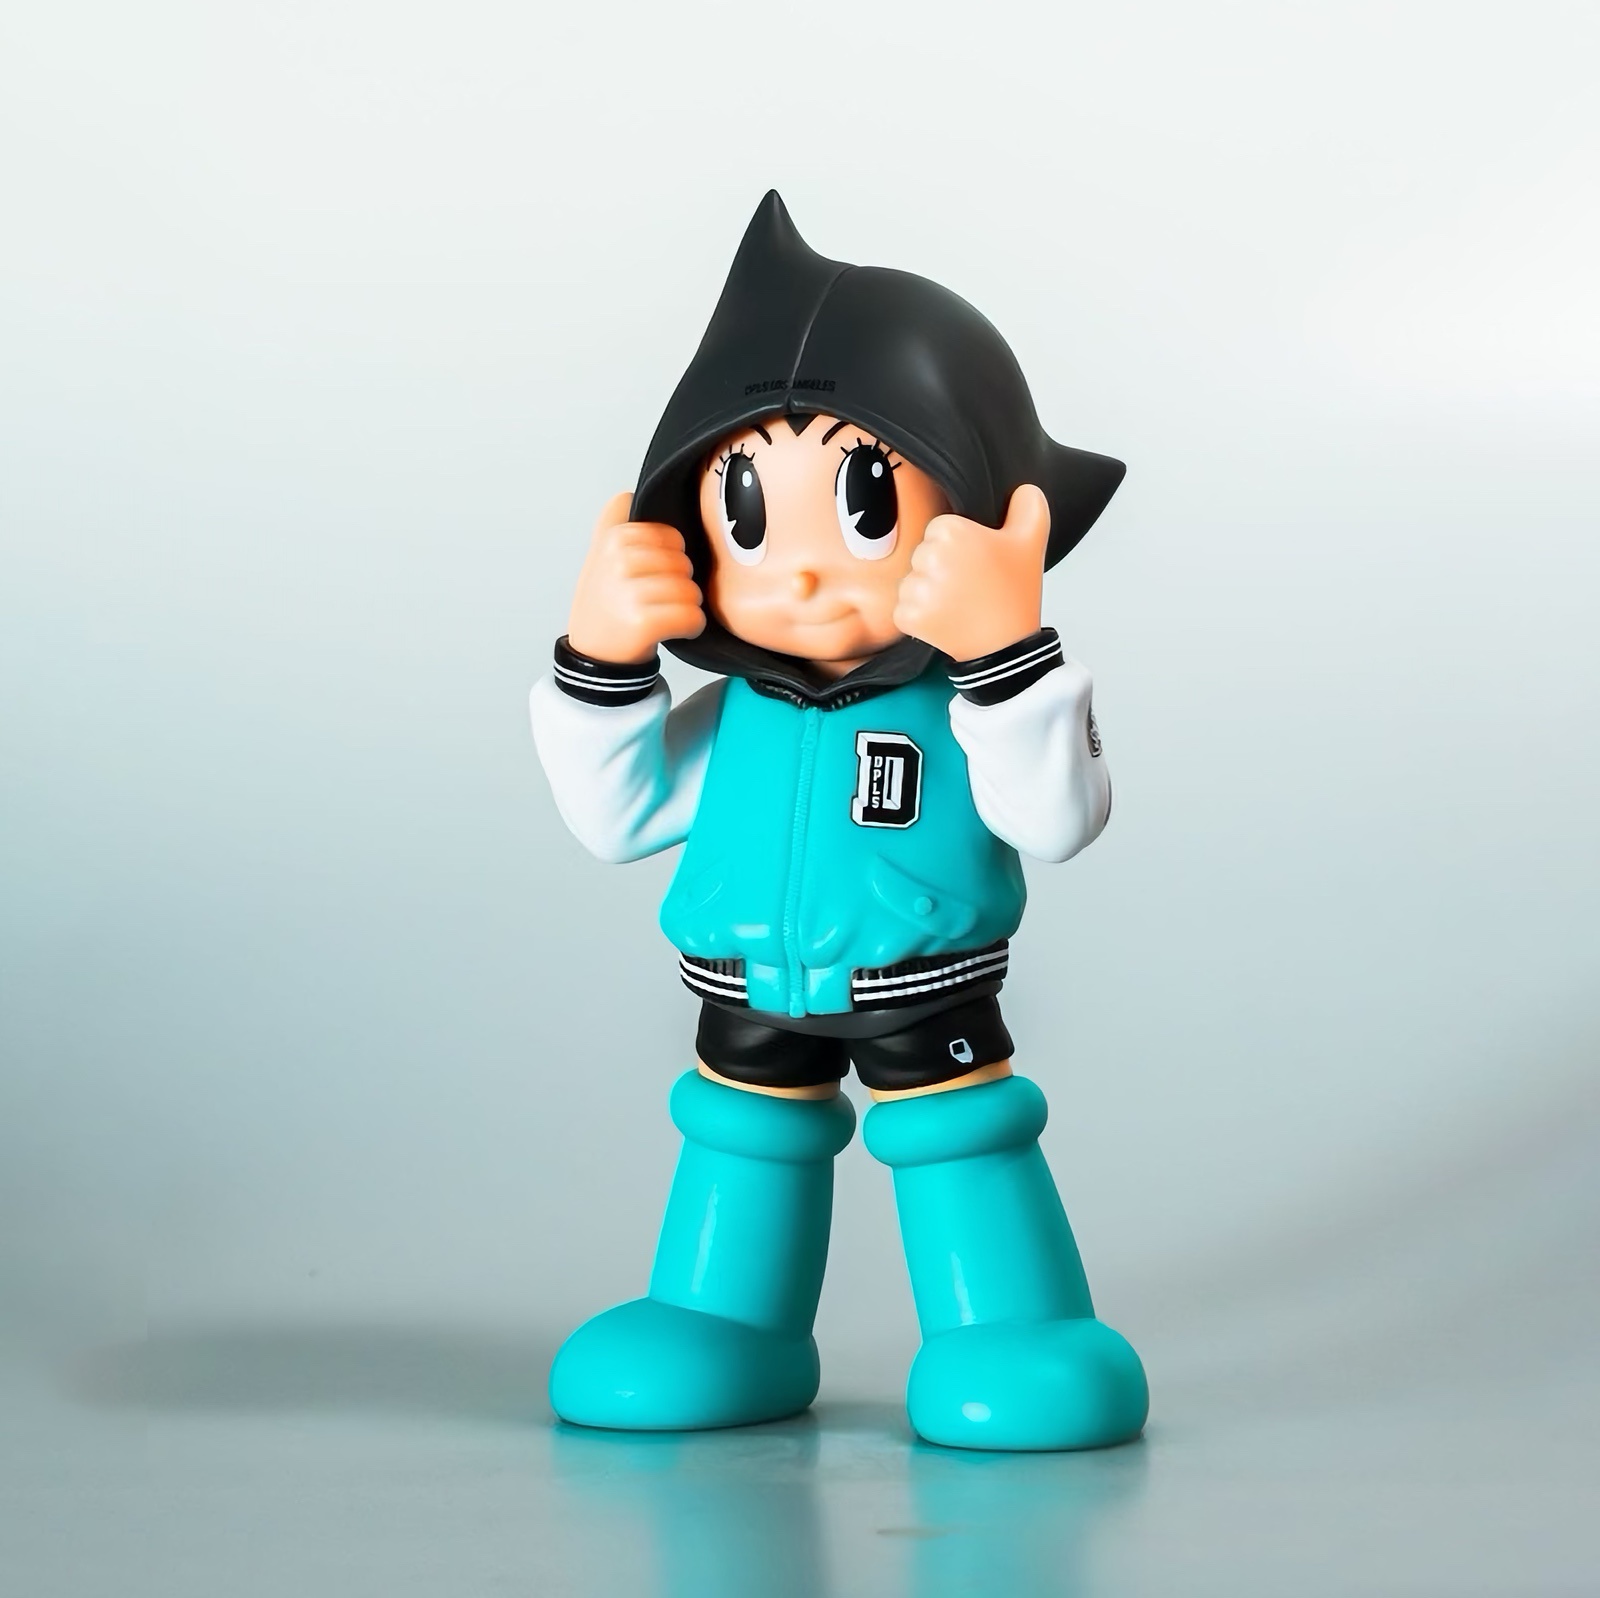 DPLS Astro Boy Hoodie-Pink and Teal by ToyQube - Vinyl Pulse